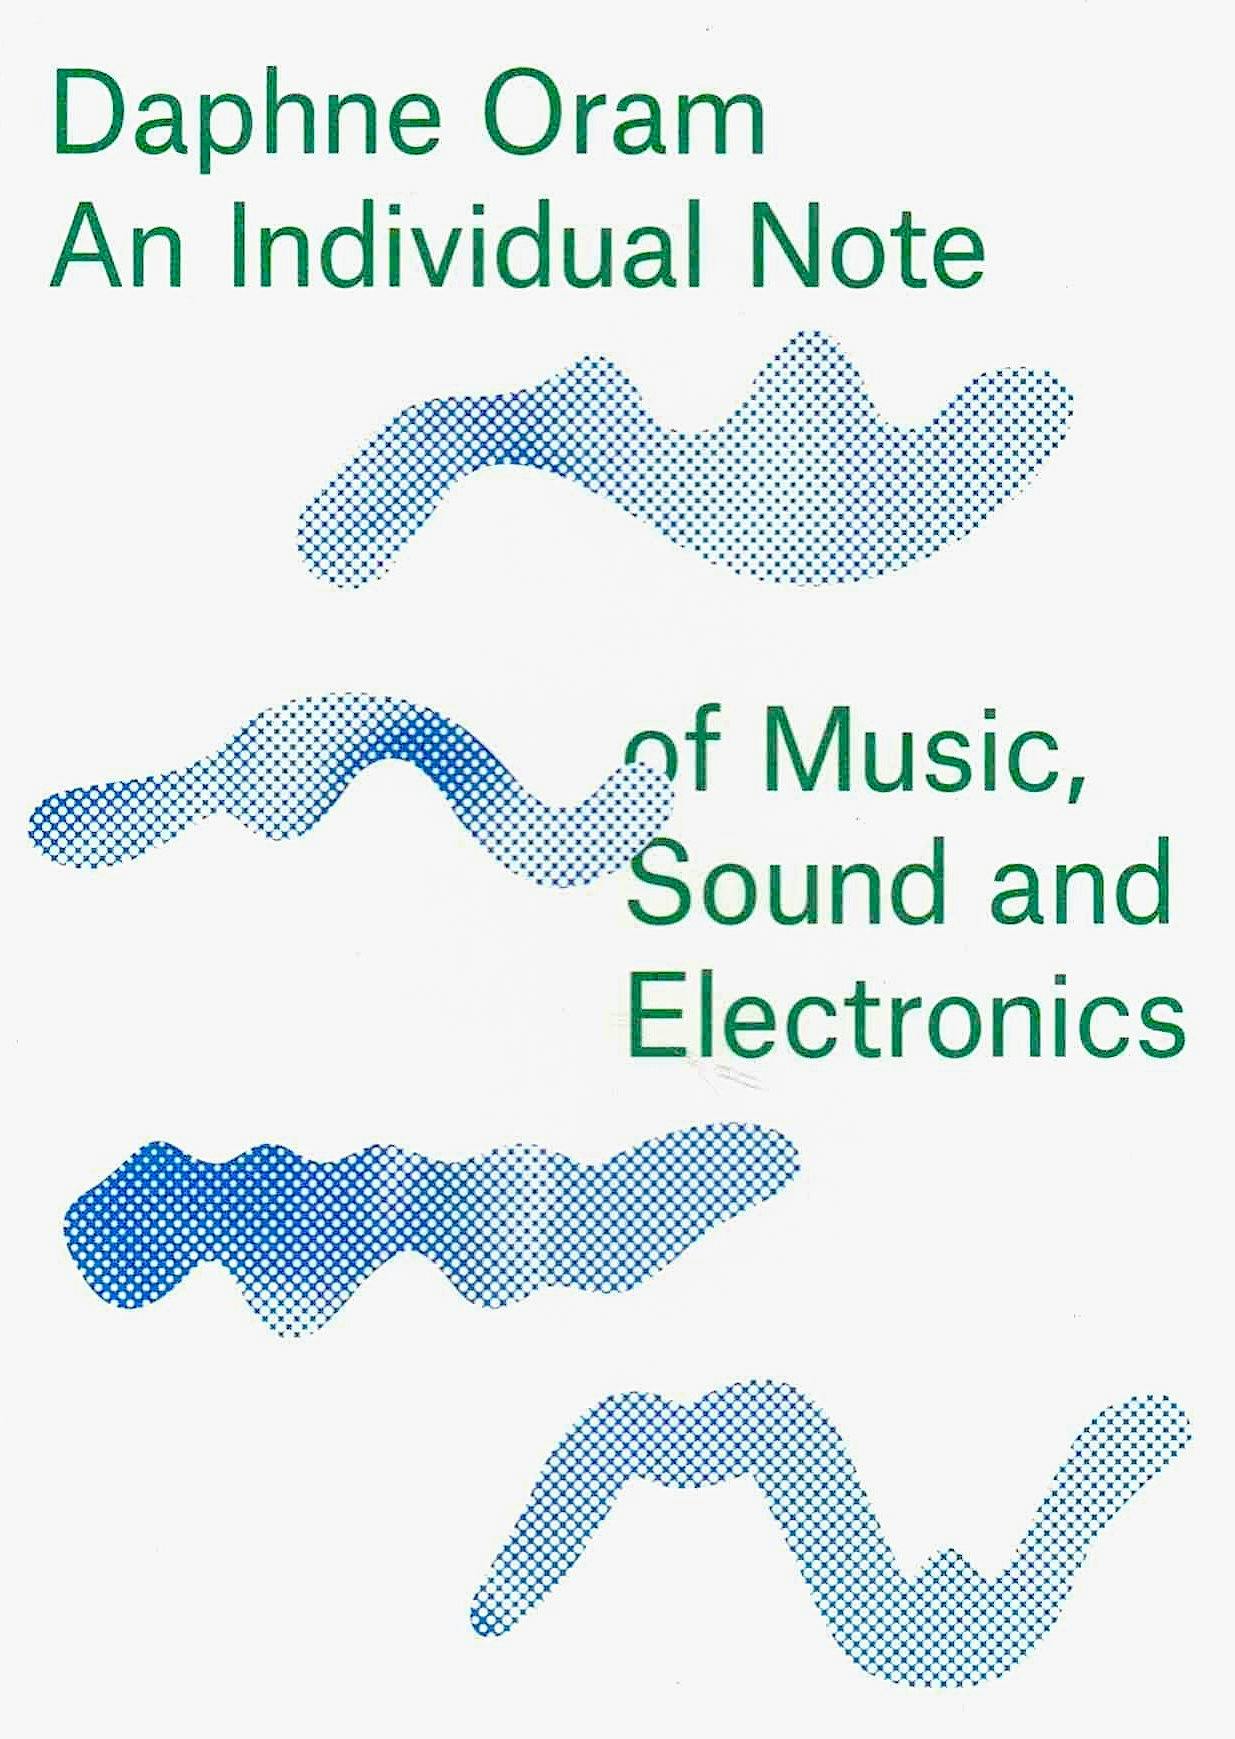 The media cover for “An Individual Note of Music, Sound, and Electronics” by Daphne Oram